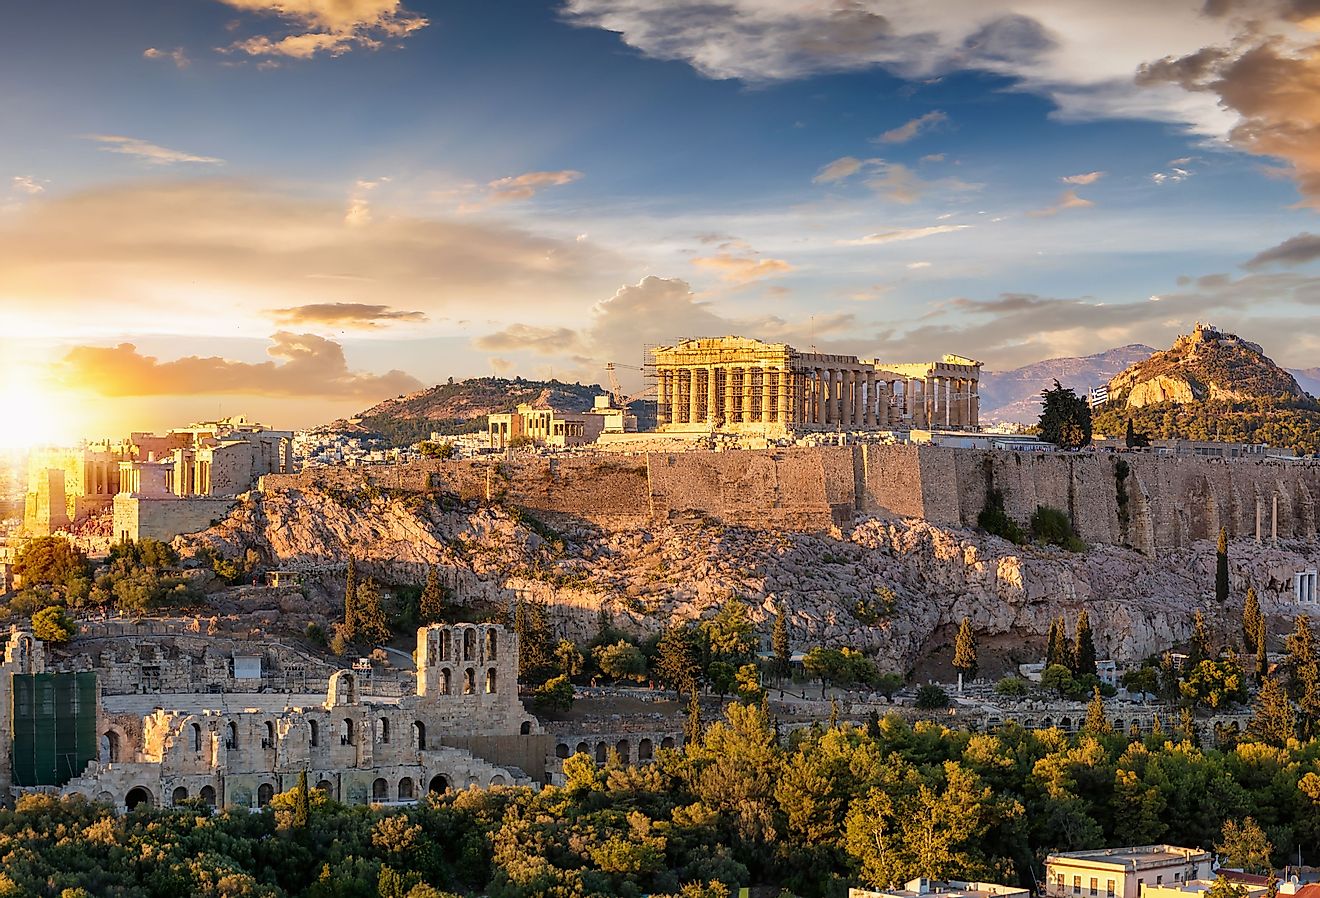 The Acropolis of Athens, Greece, with the Parthenon Temple on top of the hill during a summer sunset. Image credit: Sven Hansche via Shutterstock